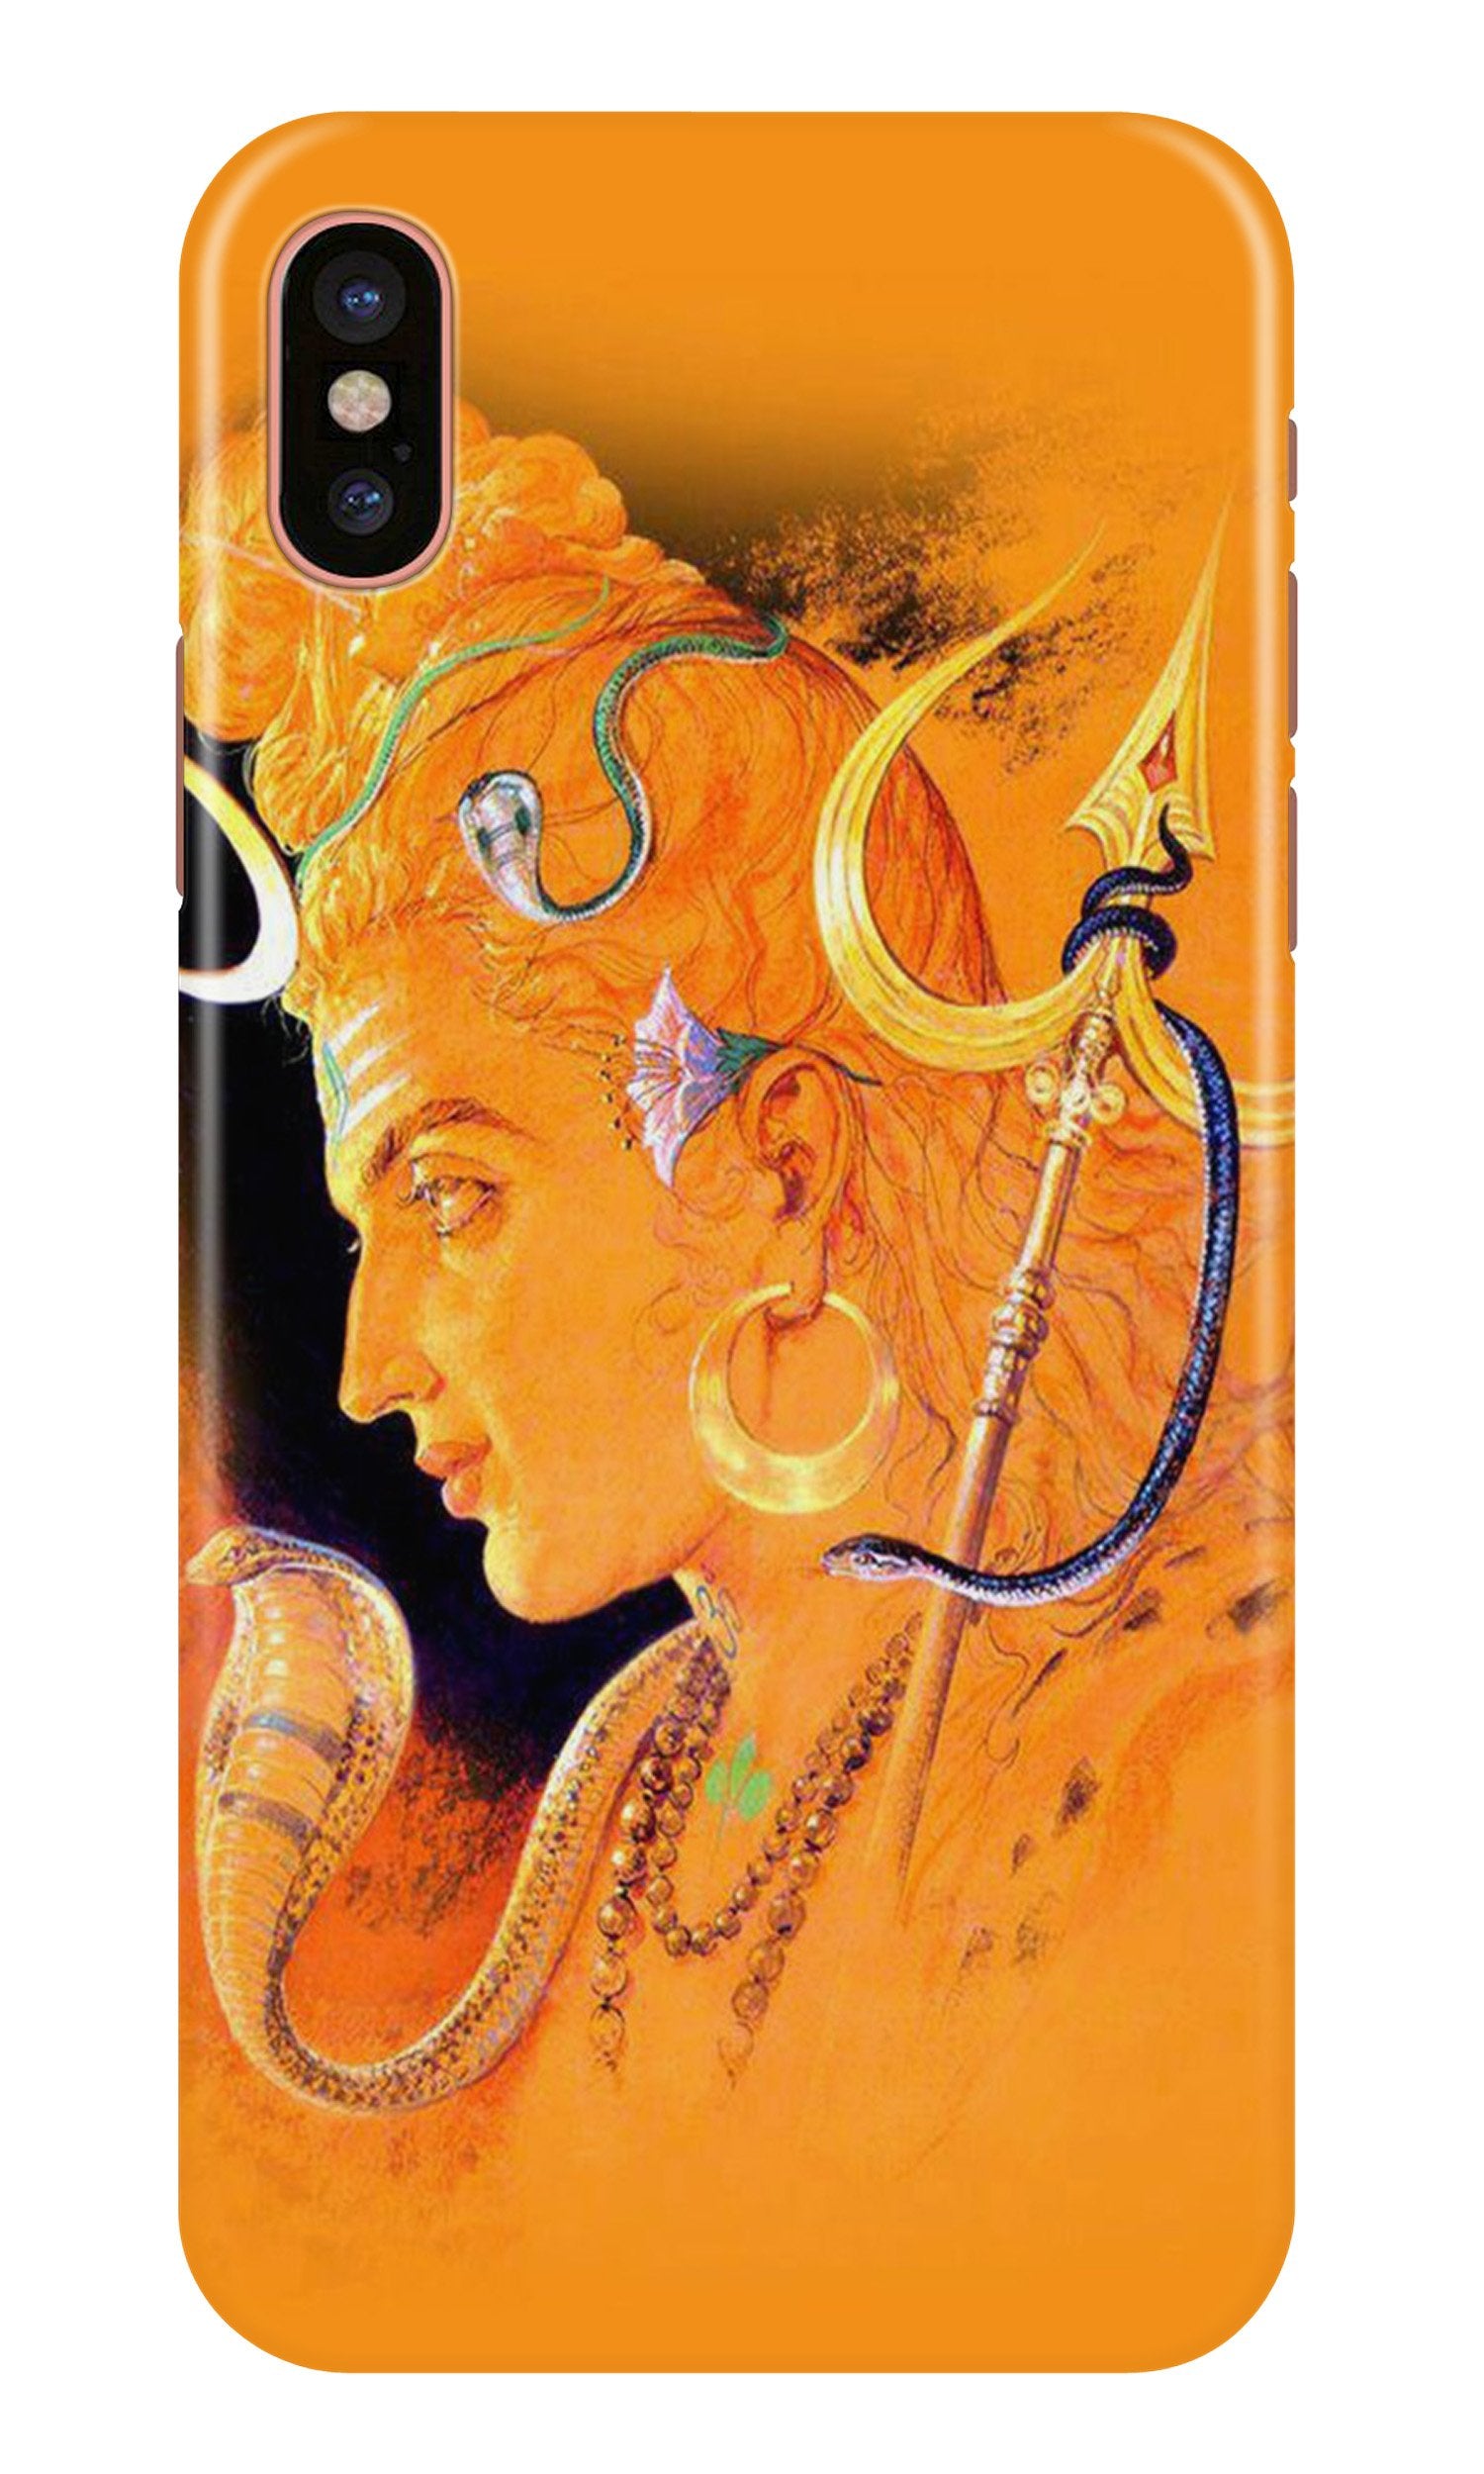 Lord Shiva Case for iPhone Xs (Design No. 293)